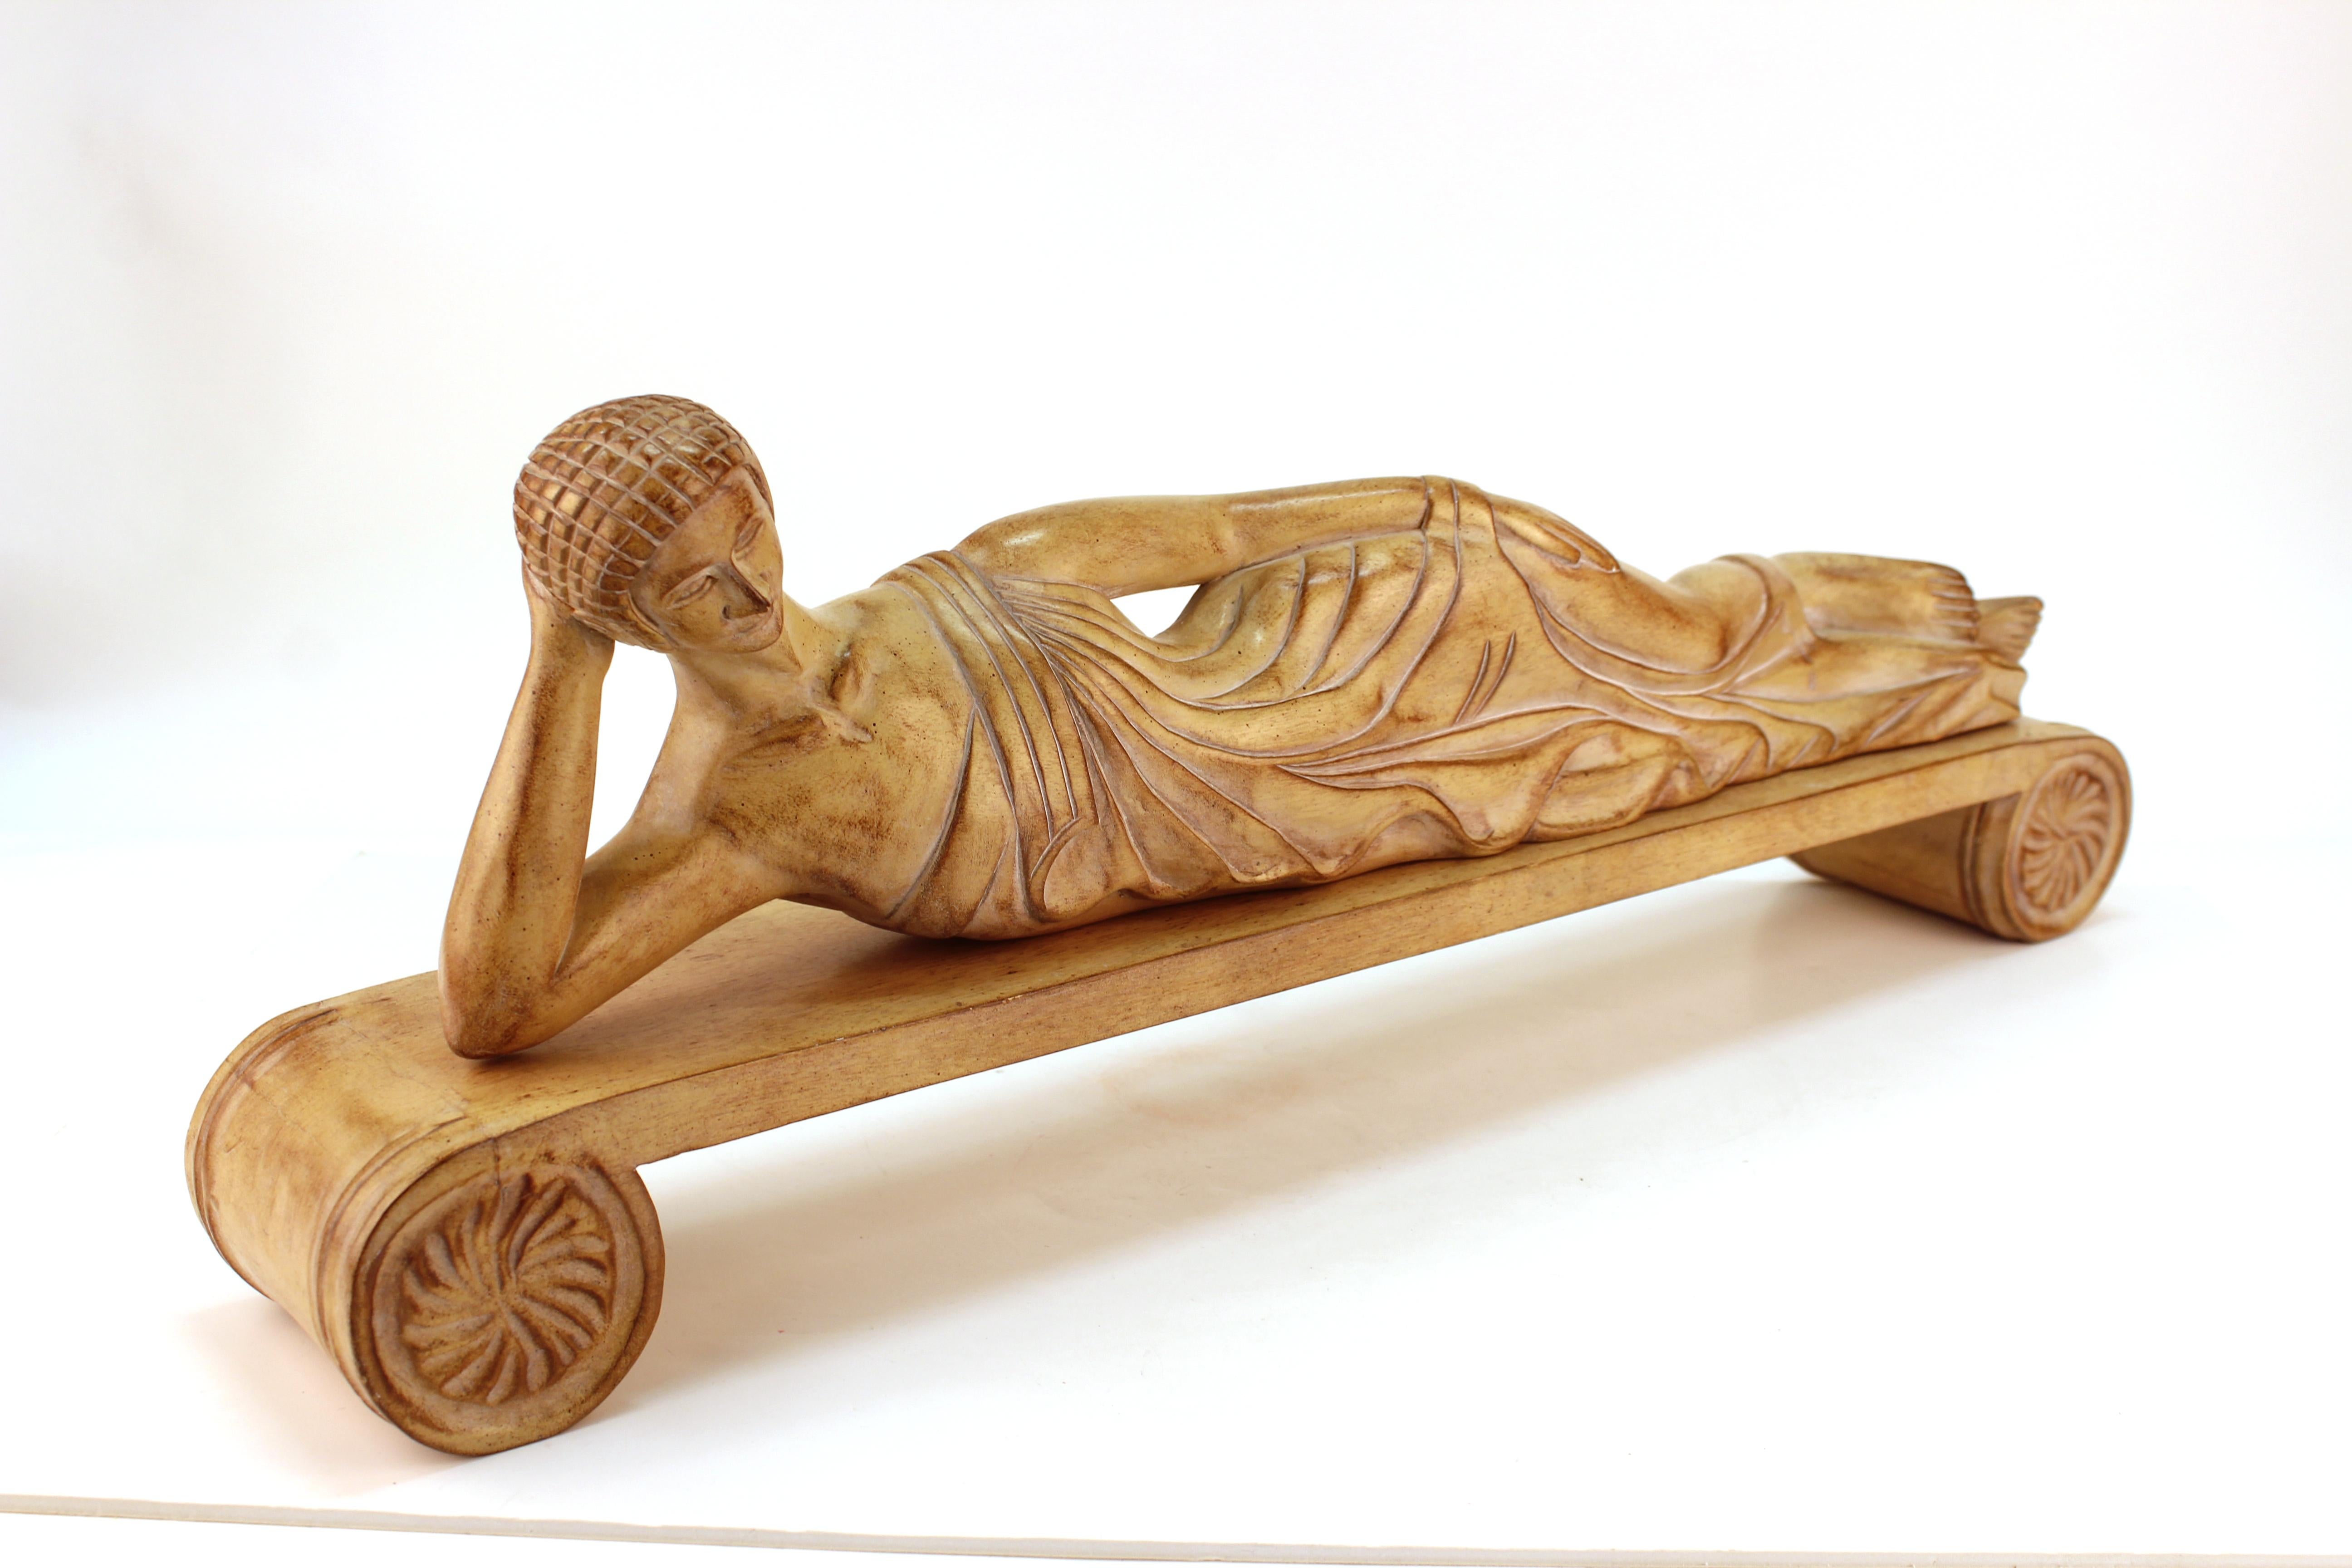 Etruscan style wood sculpture depicting a reclining woman on a scroll bench. In good vintage condition.